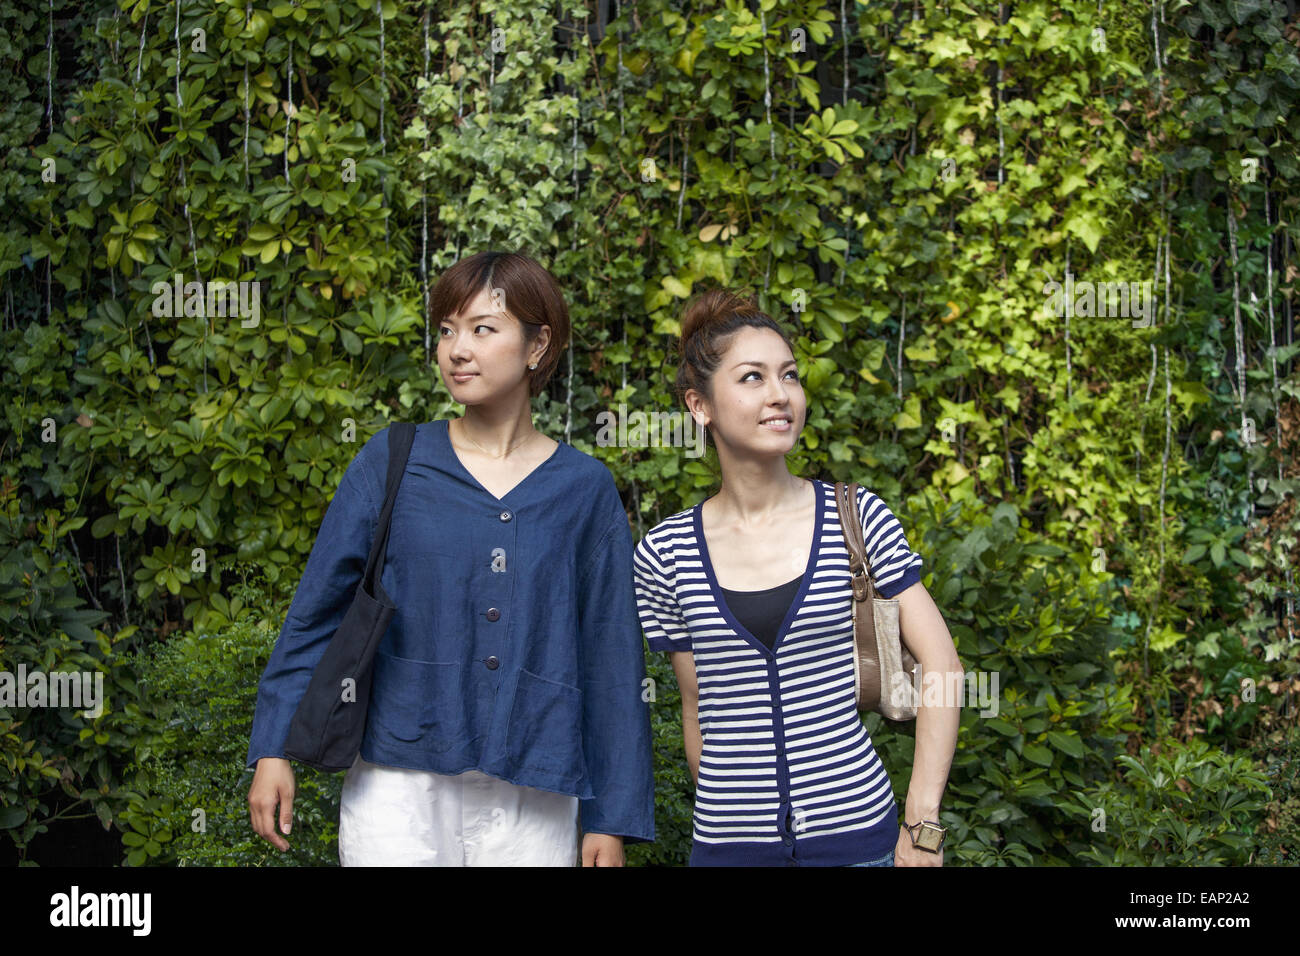 Two women standing side by side. Stock Photo